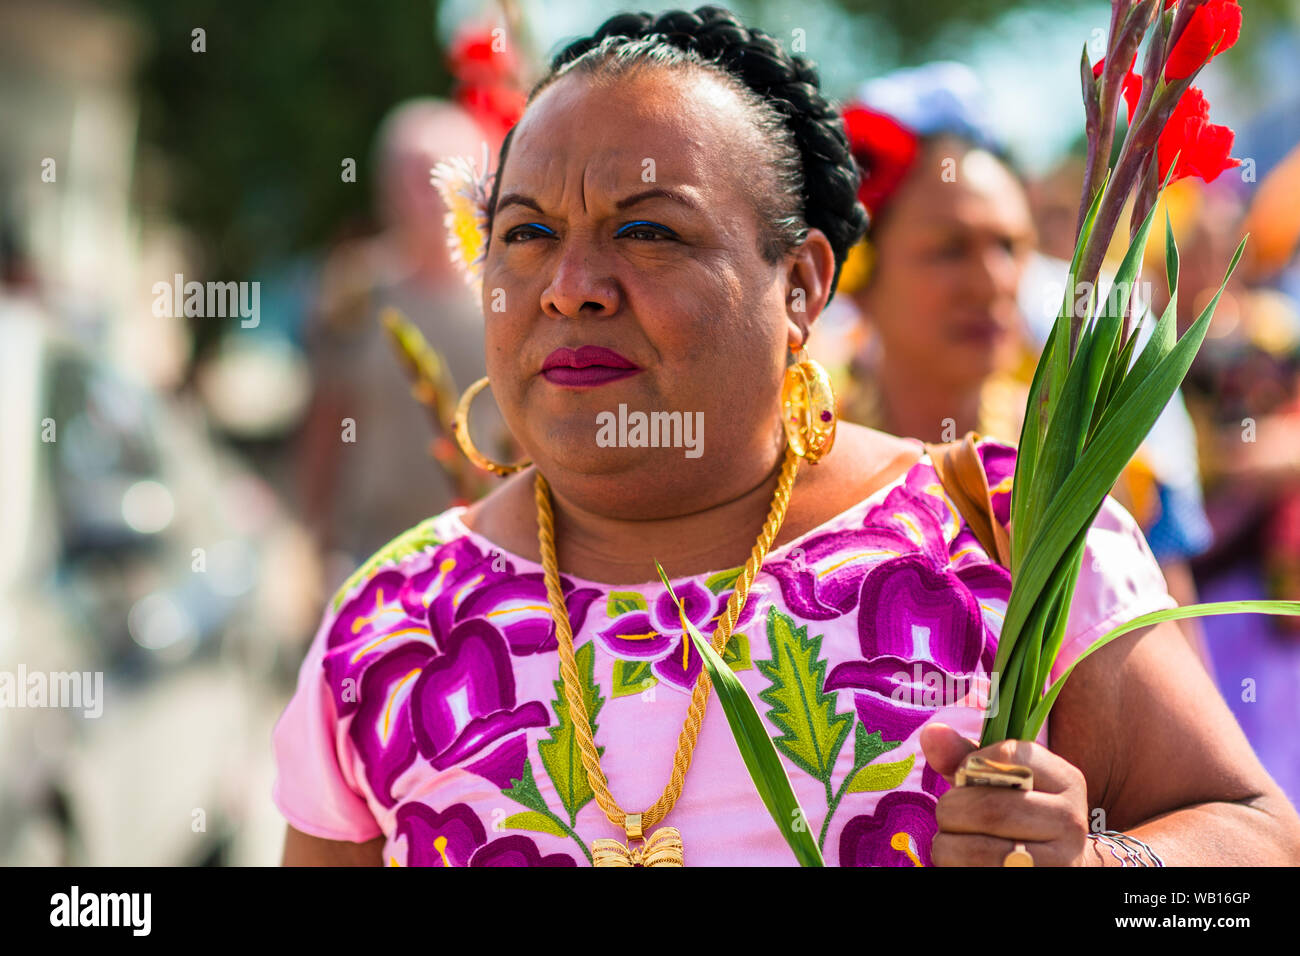 A Mexican “muxe” (typically, a homosexual man wearing female clothes) takes part in the festival in Juchitán de Zaragoza, Mexico. Stock Photo